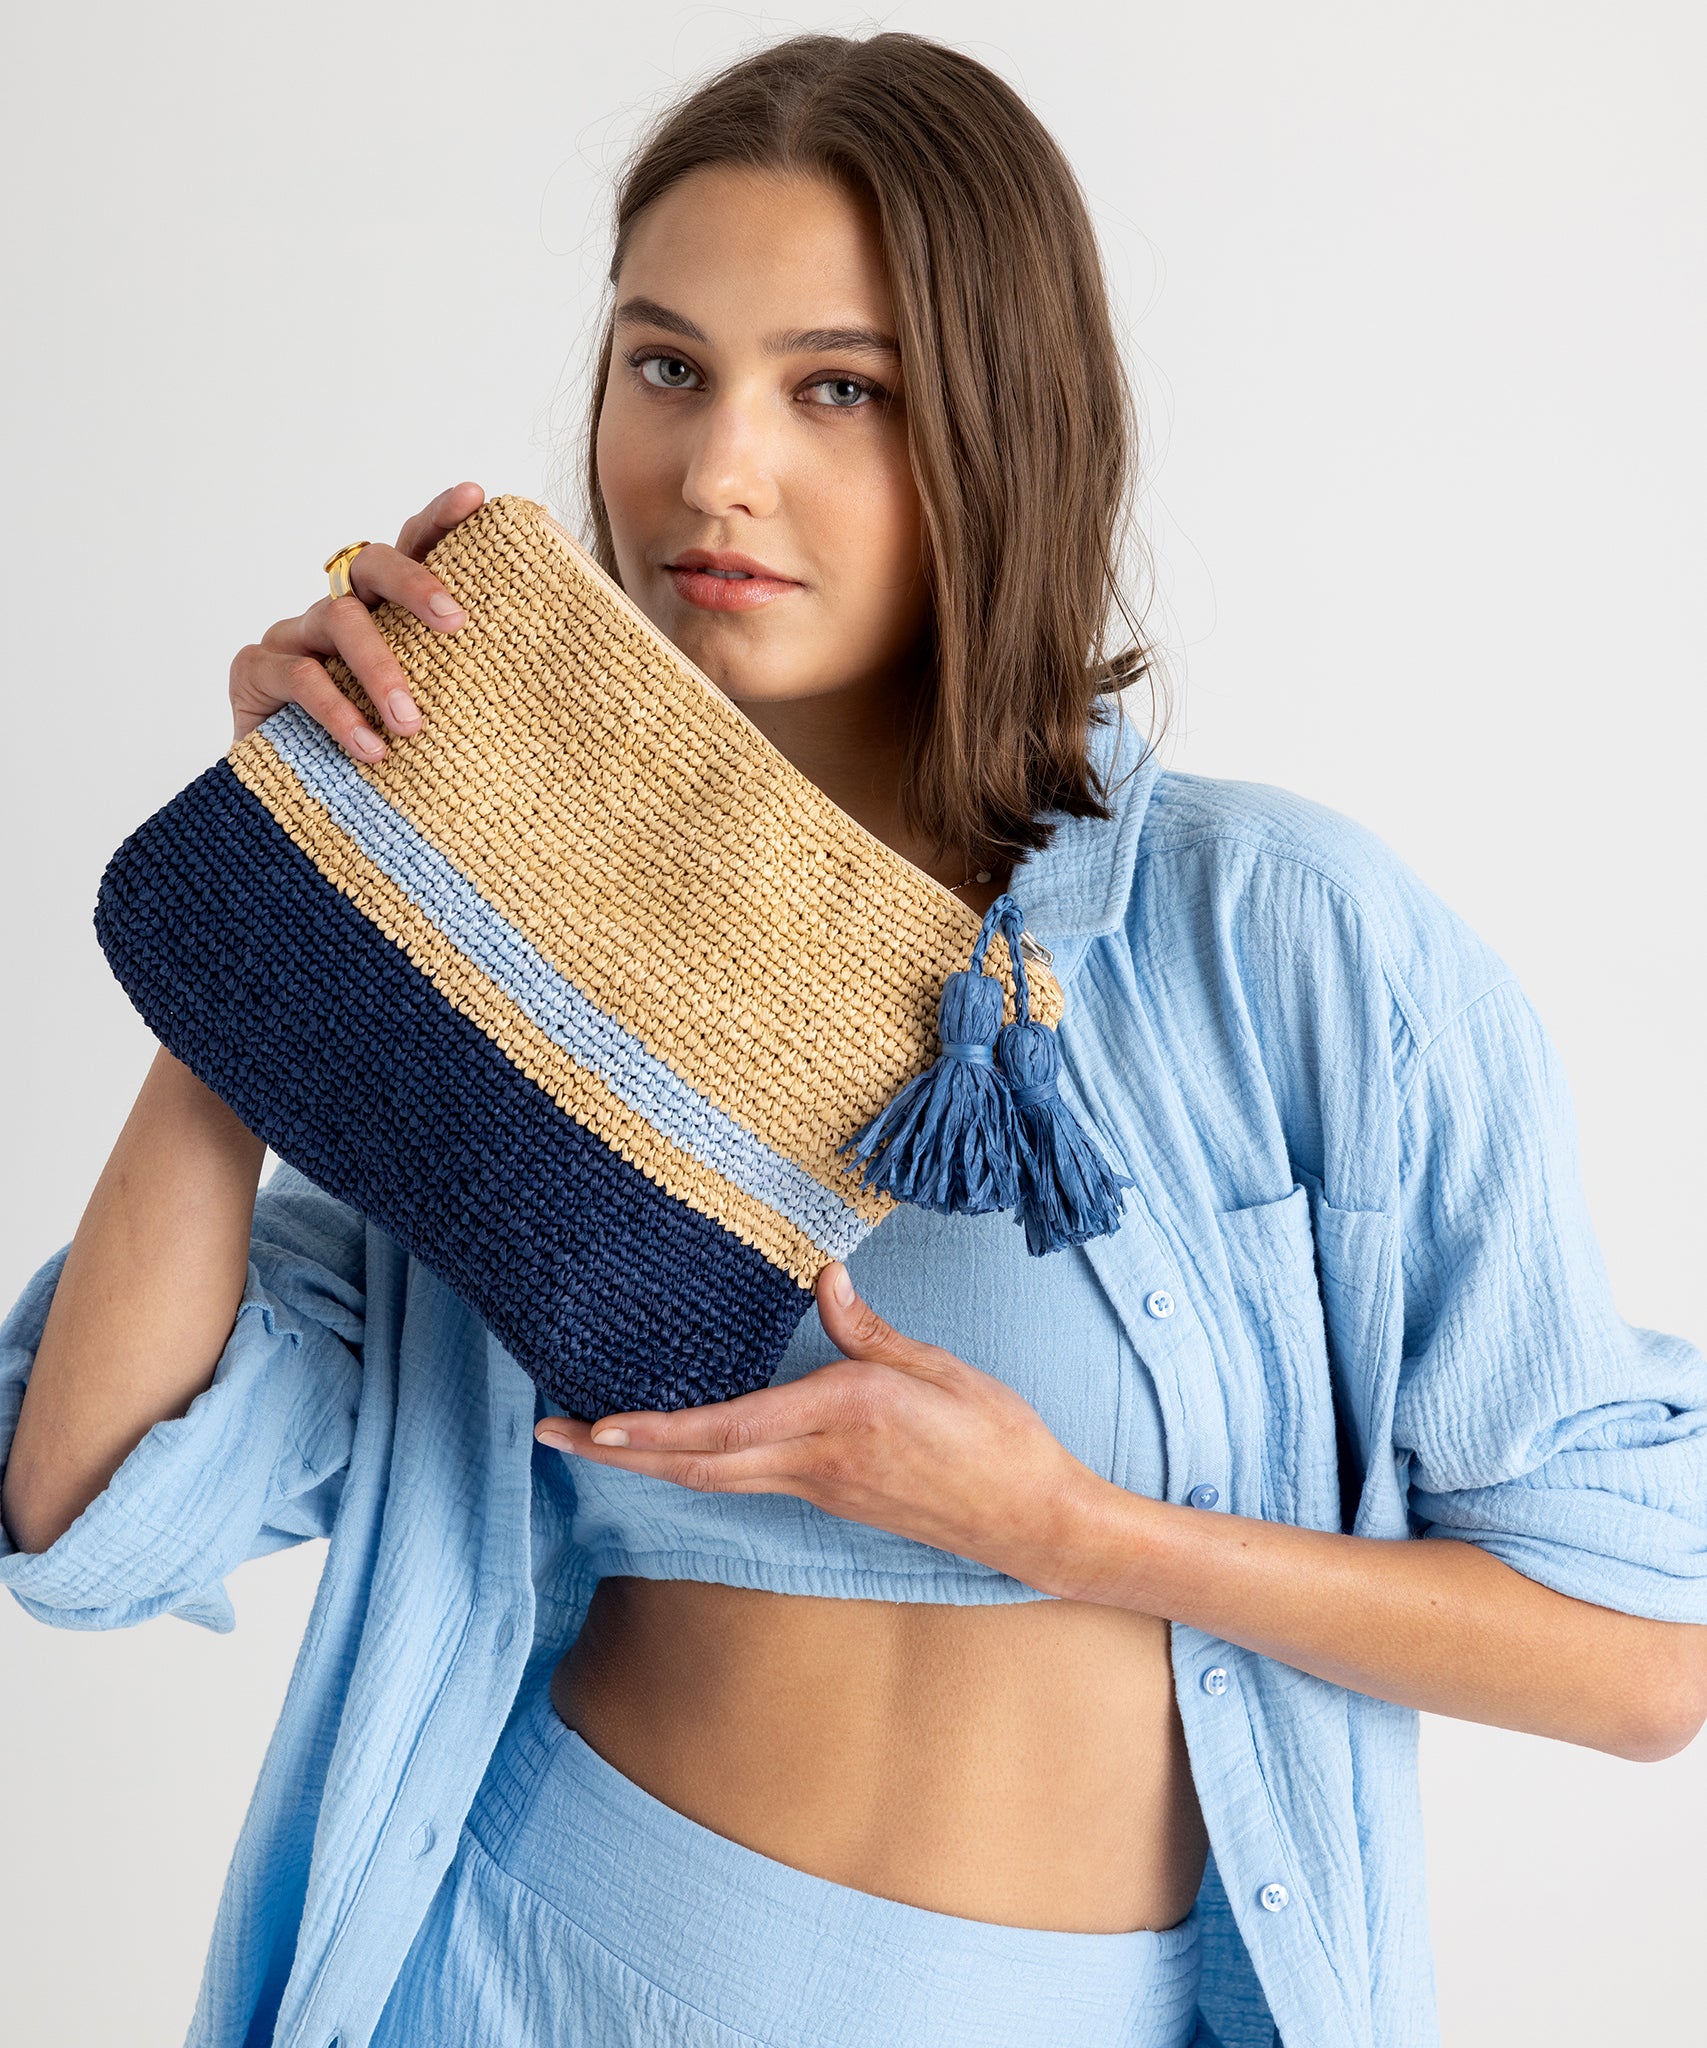 Tropic Stripe Clutch in color Natural/Navy held by model